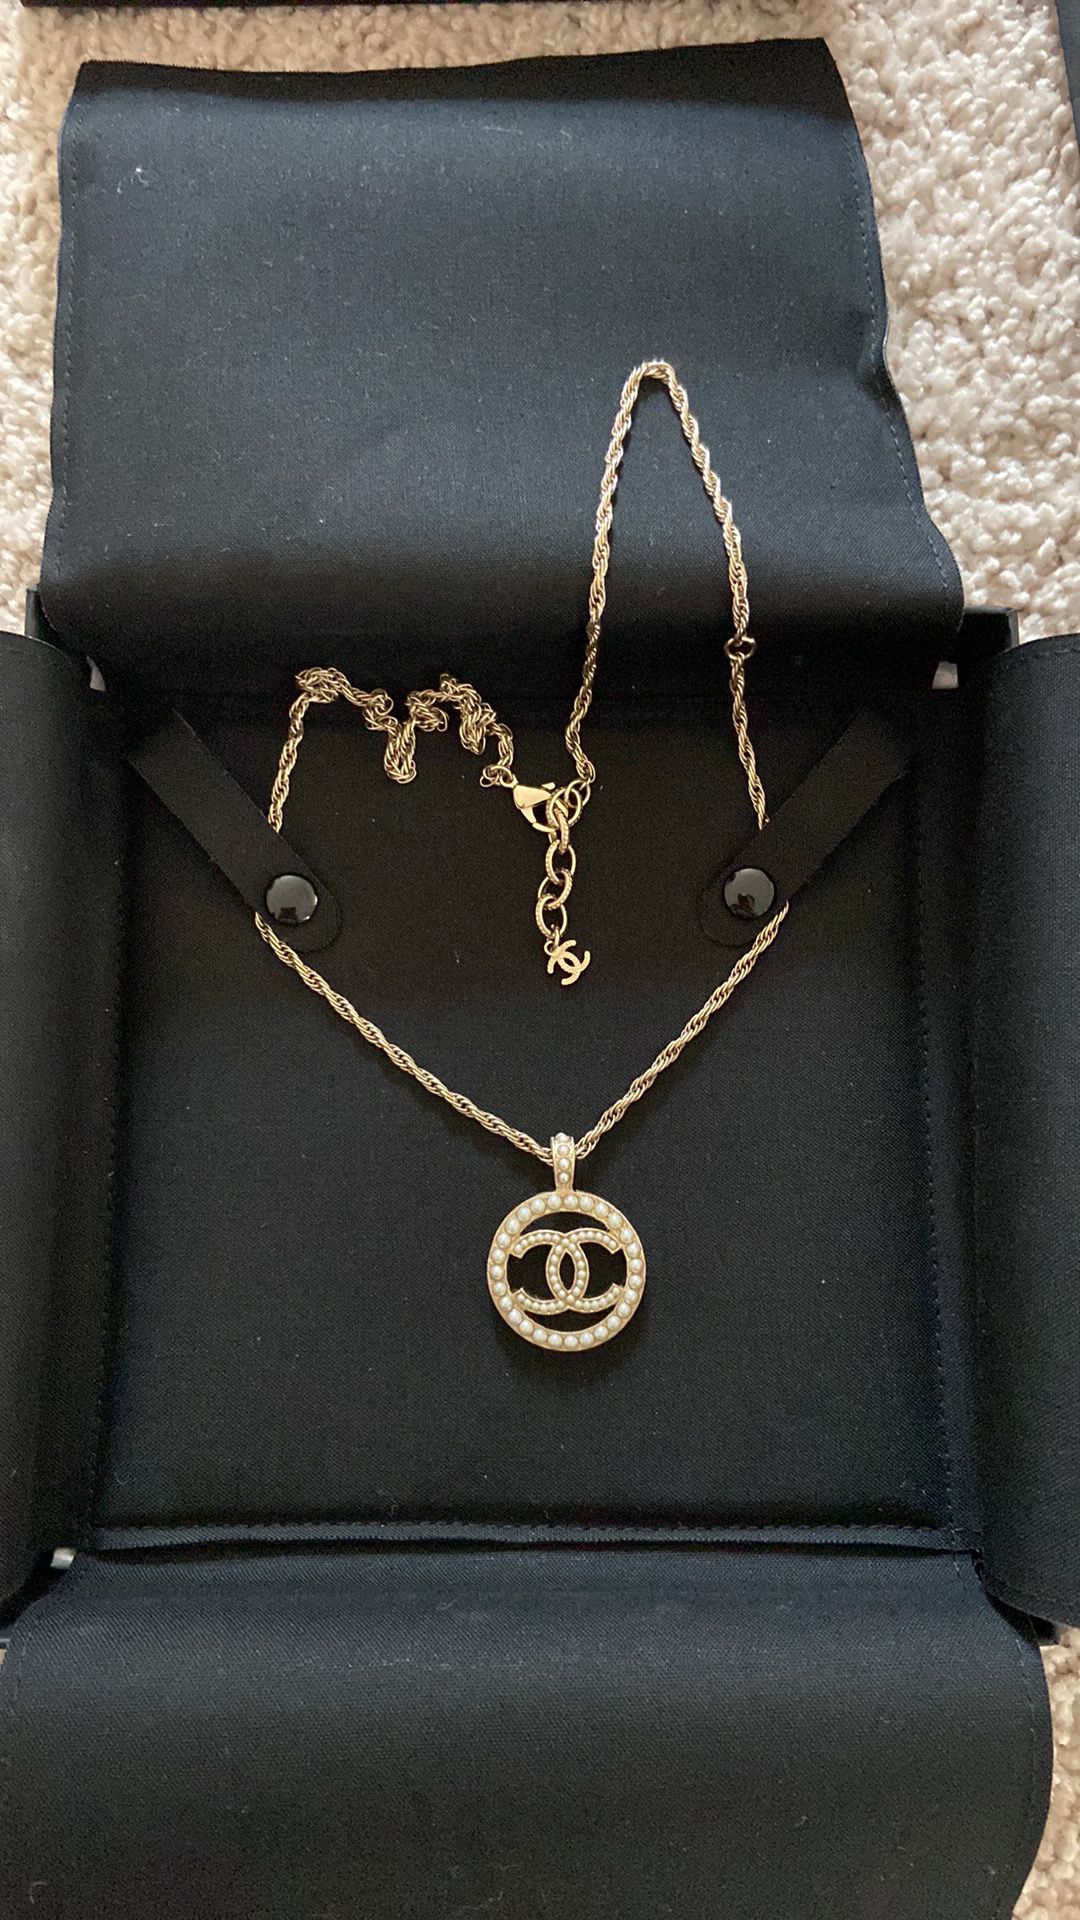 Authentic Chanel necklace